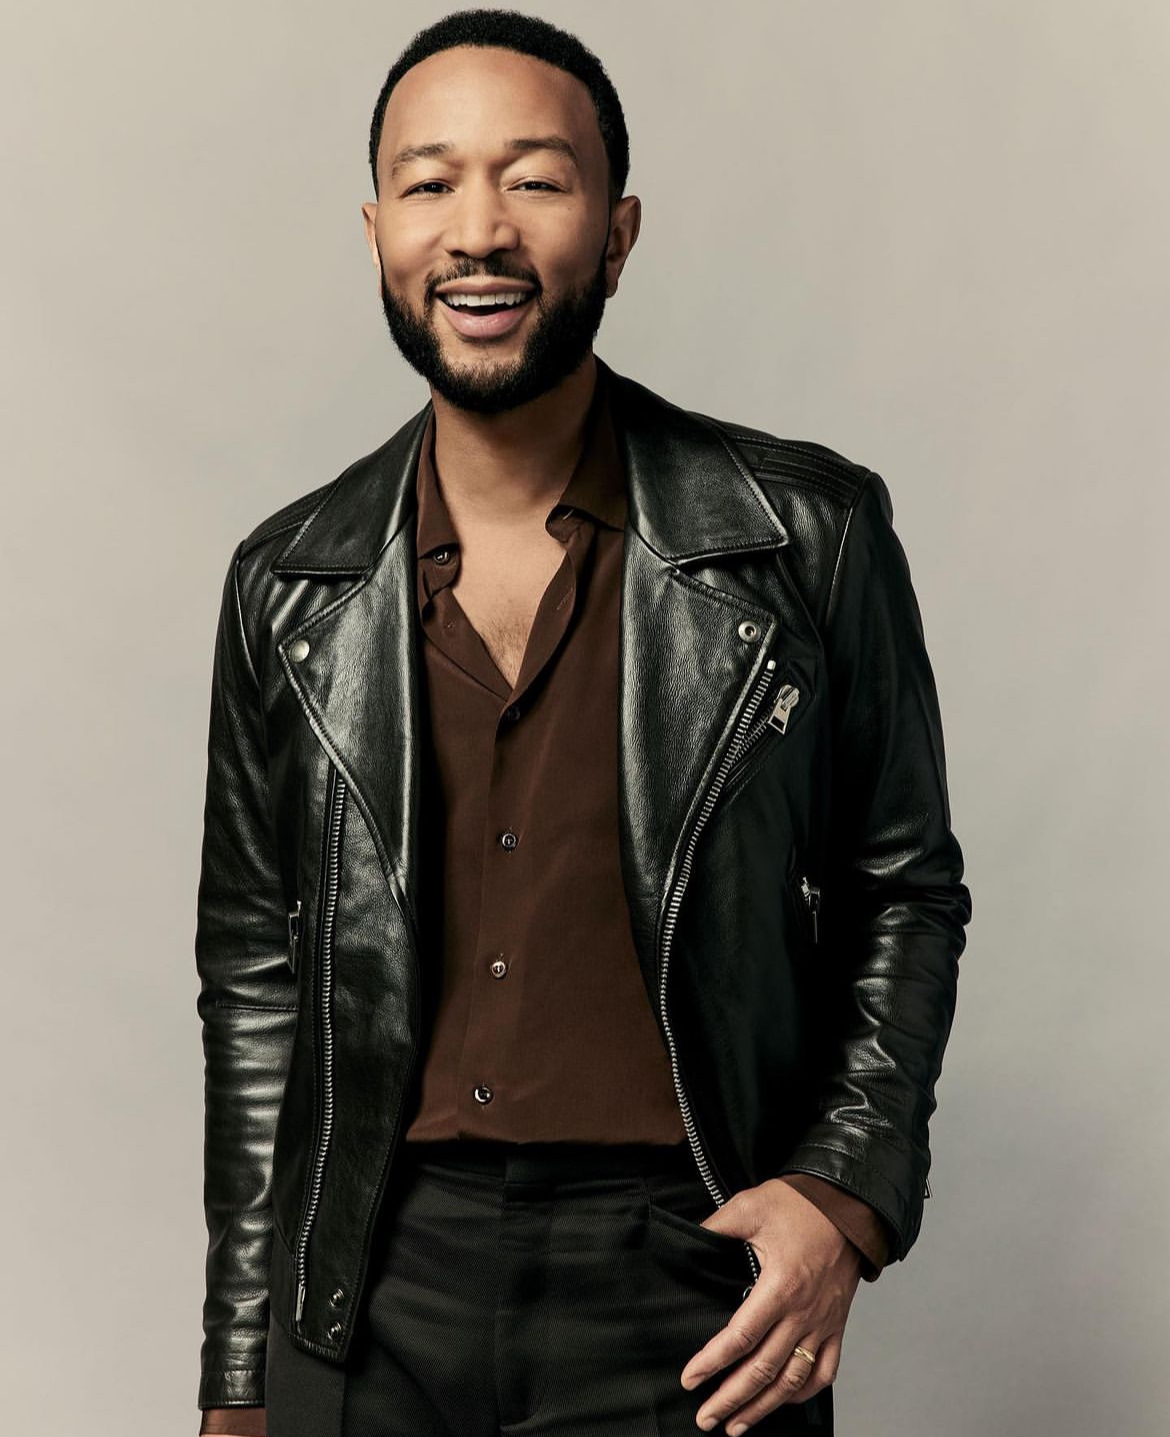 John Legend's brand is affordable. He emphasized this accessibility, stating, “There’s a wealth gap. We couldn’t price the products in a way that a lot of Black and brown people couldn’t afford knowing that there’s an income gap – we didn’t want to do that.”